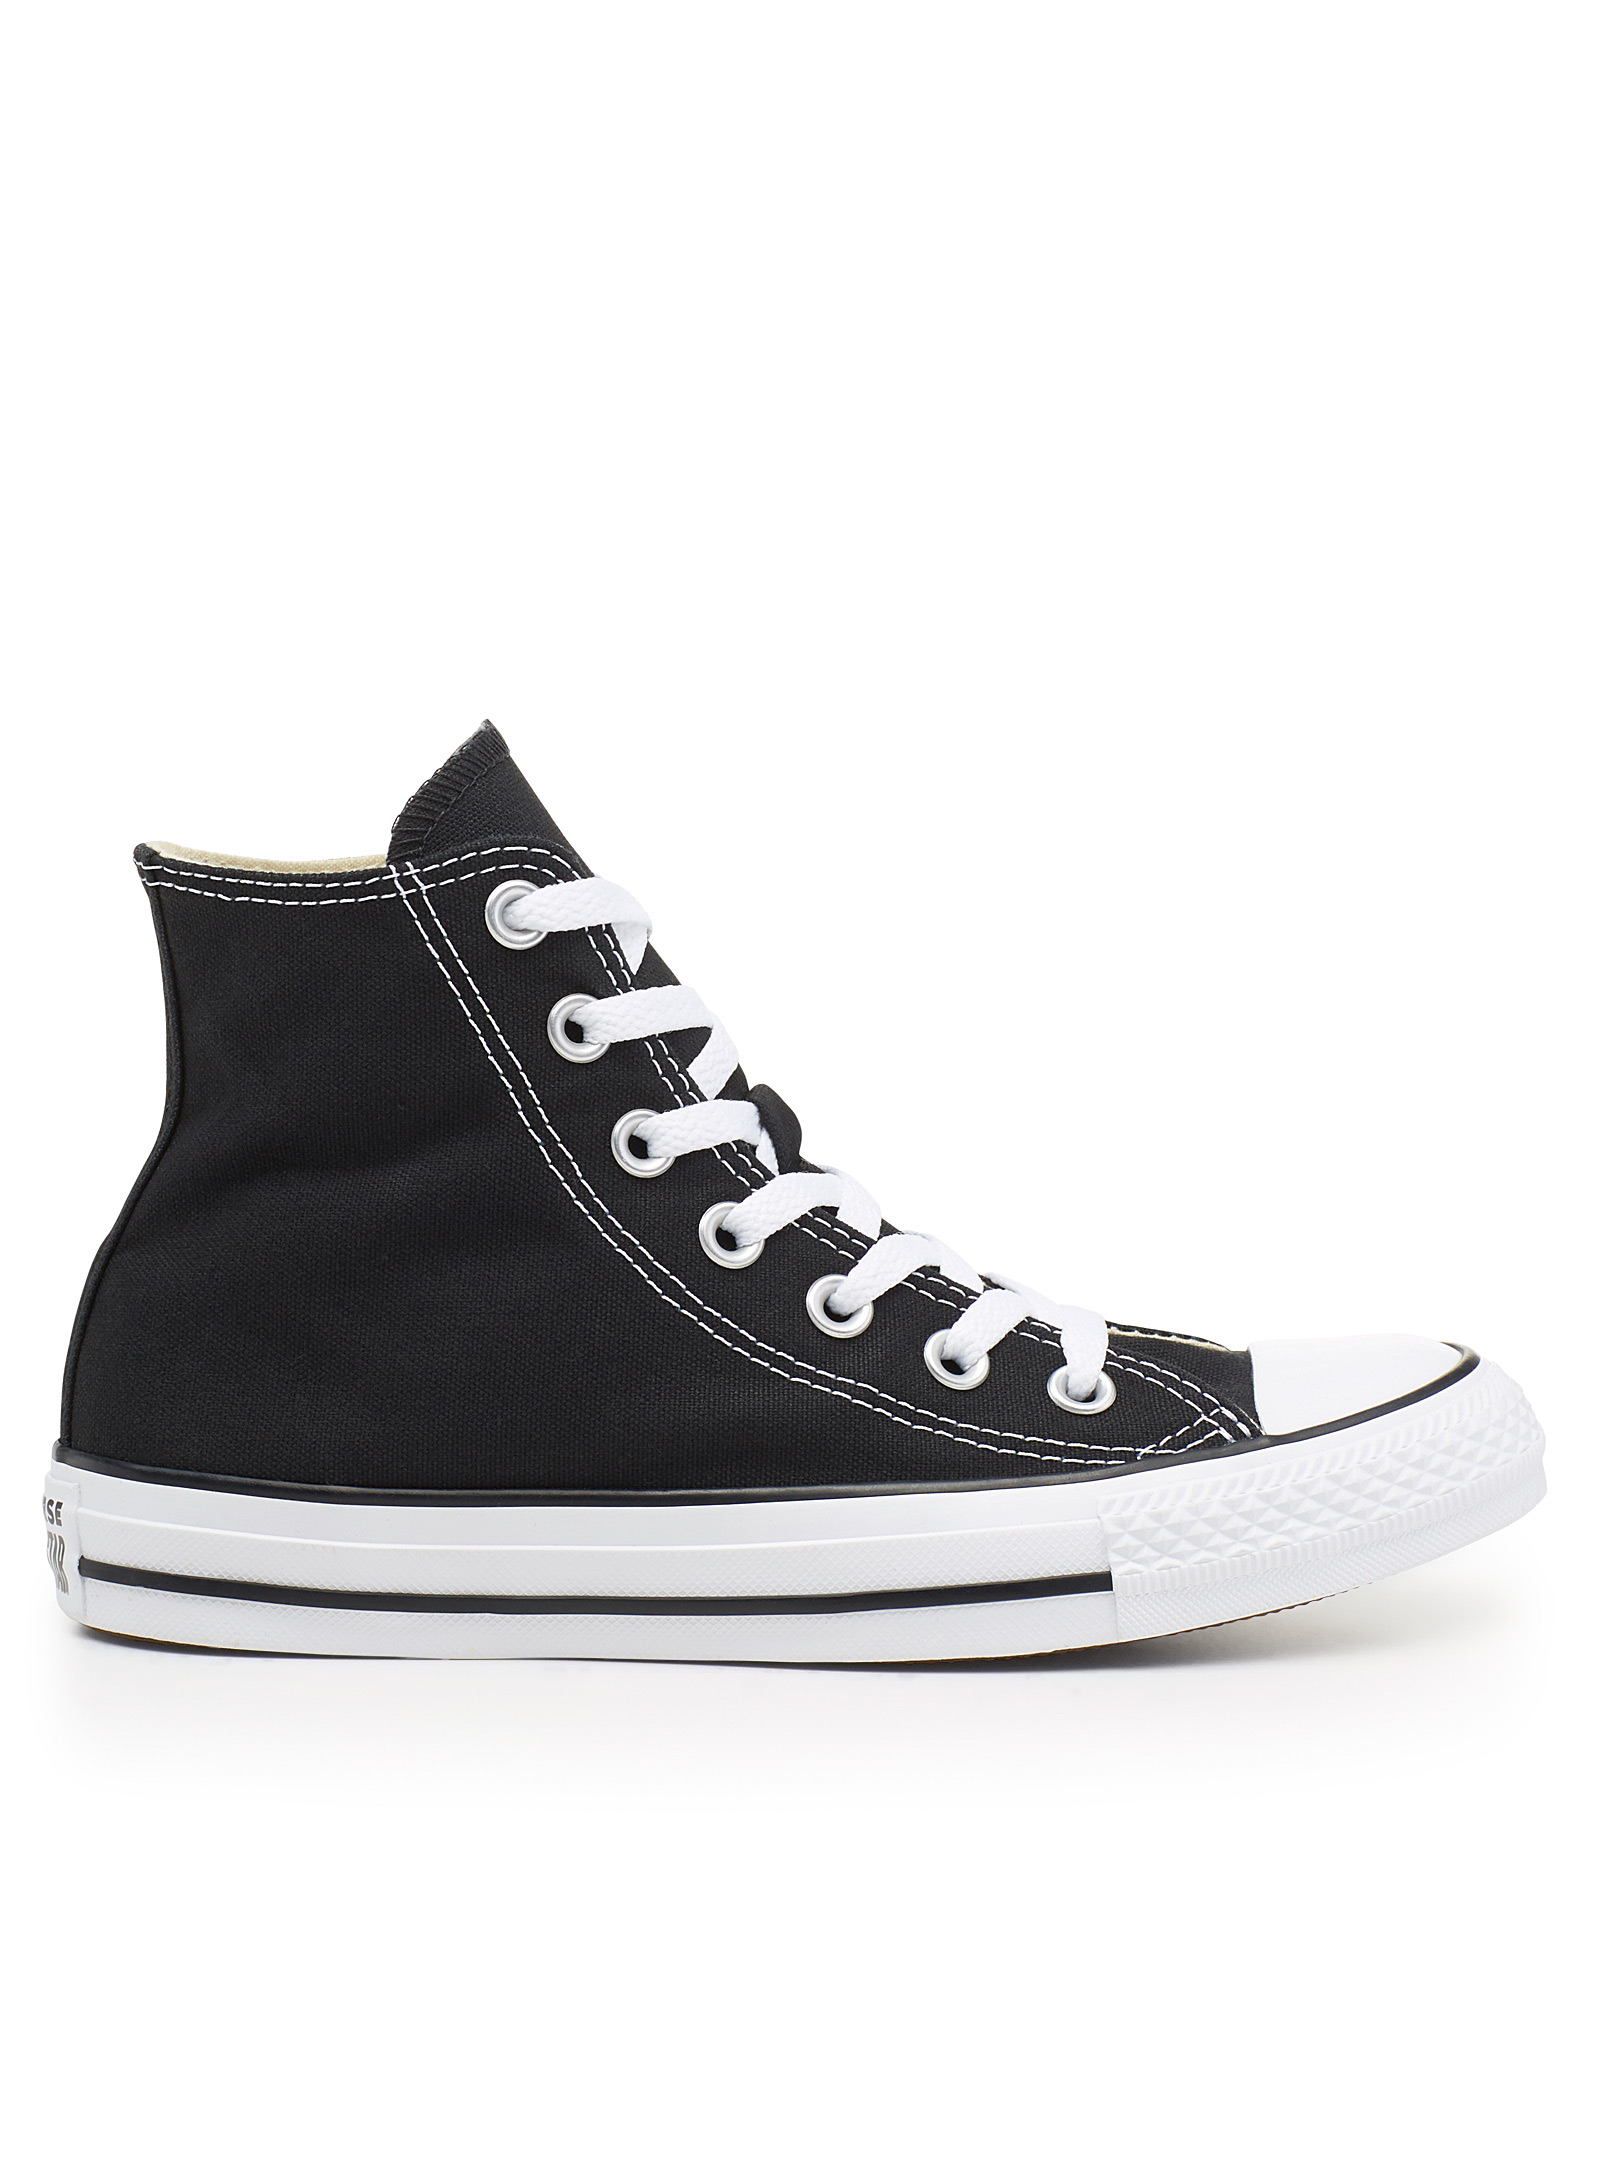 Converse - Chaussures Le Sneaker Chuck Taylor All Star High Top Femme